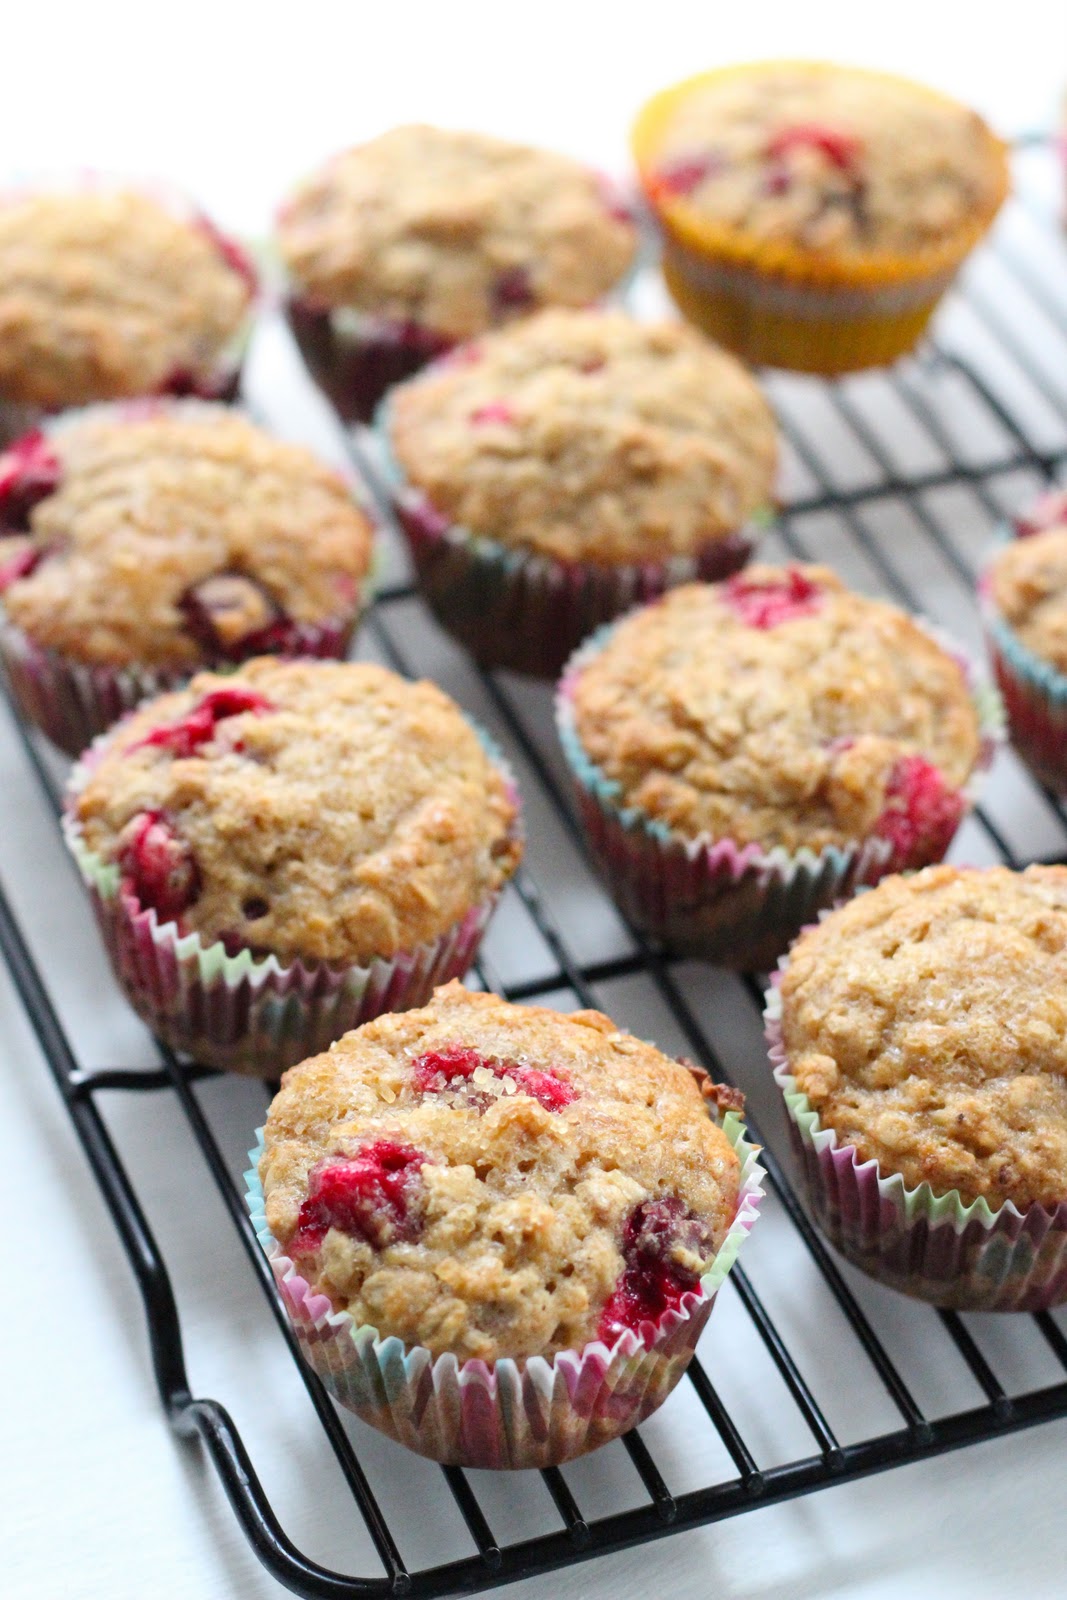 Cranberry and oatmeal breakfast muffins